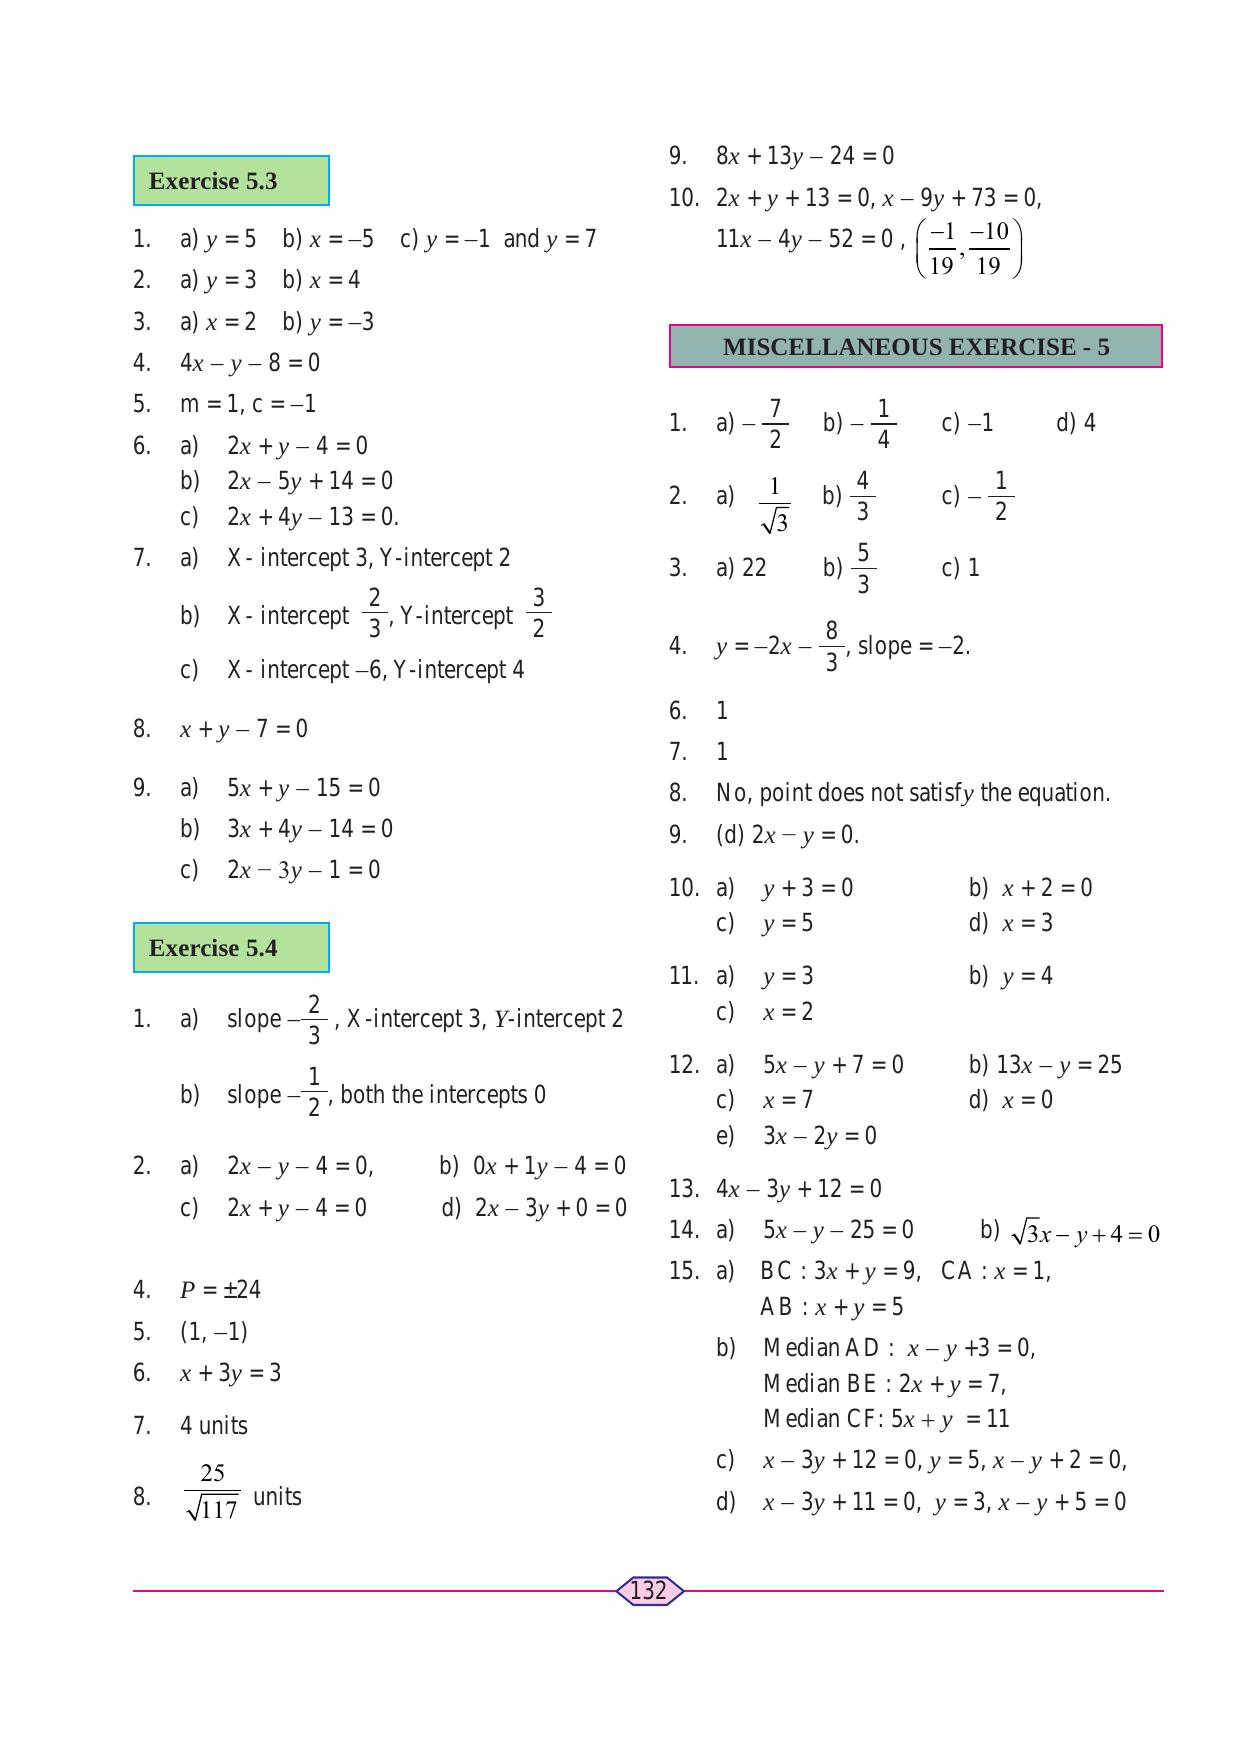 Maharashtra Board Class 11 Maths (Commerce) (Part 1) Textbook - Page 142